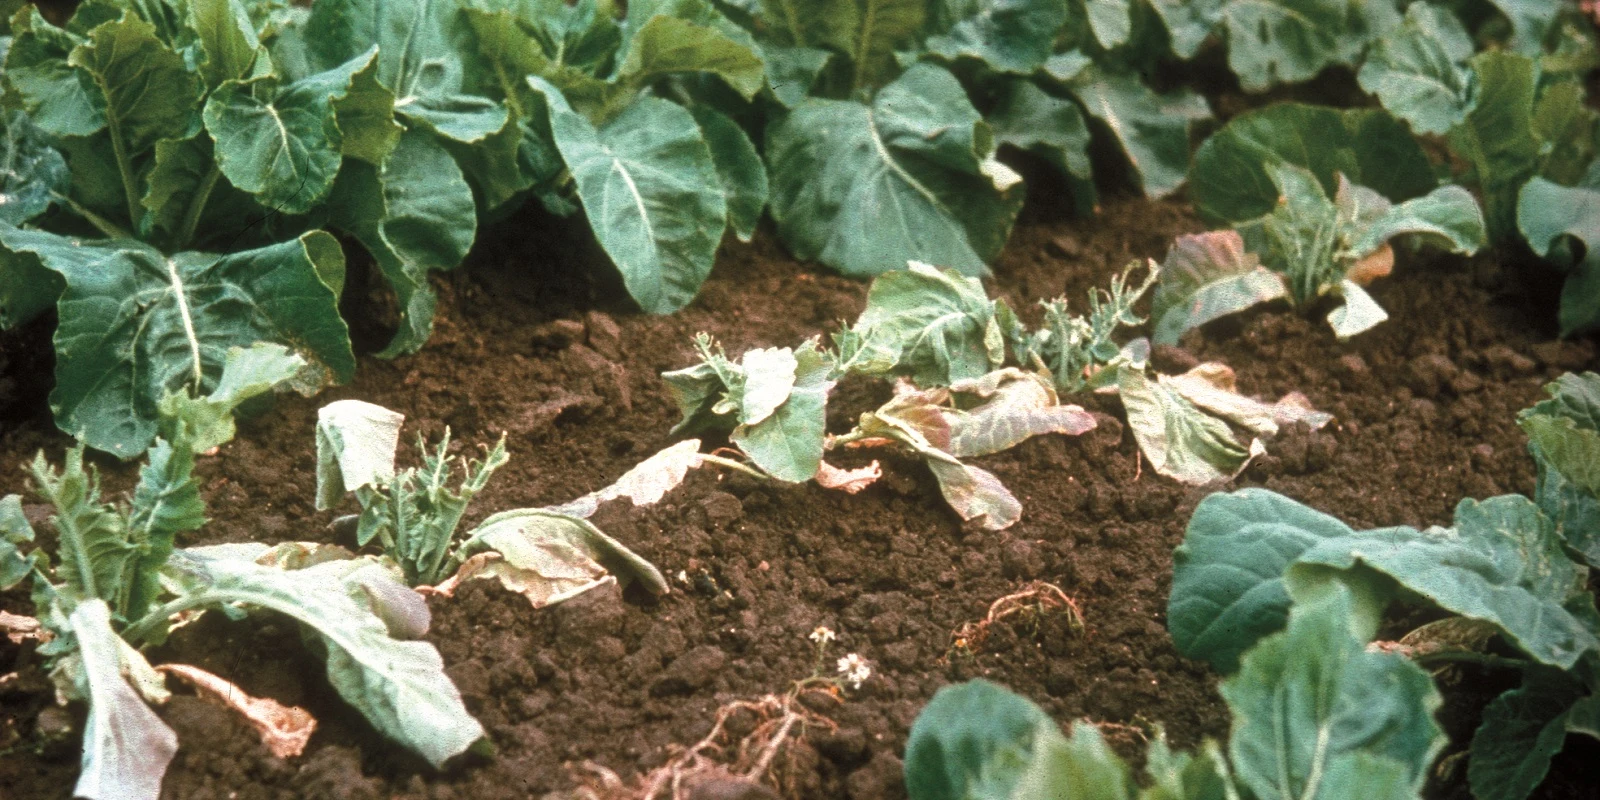 Cabbage root fly damage.